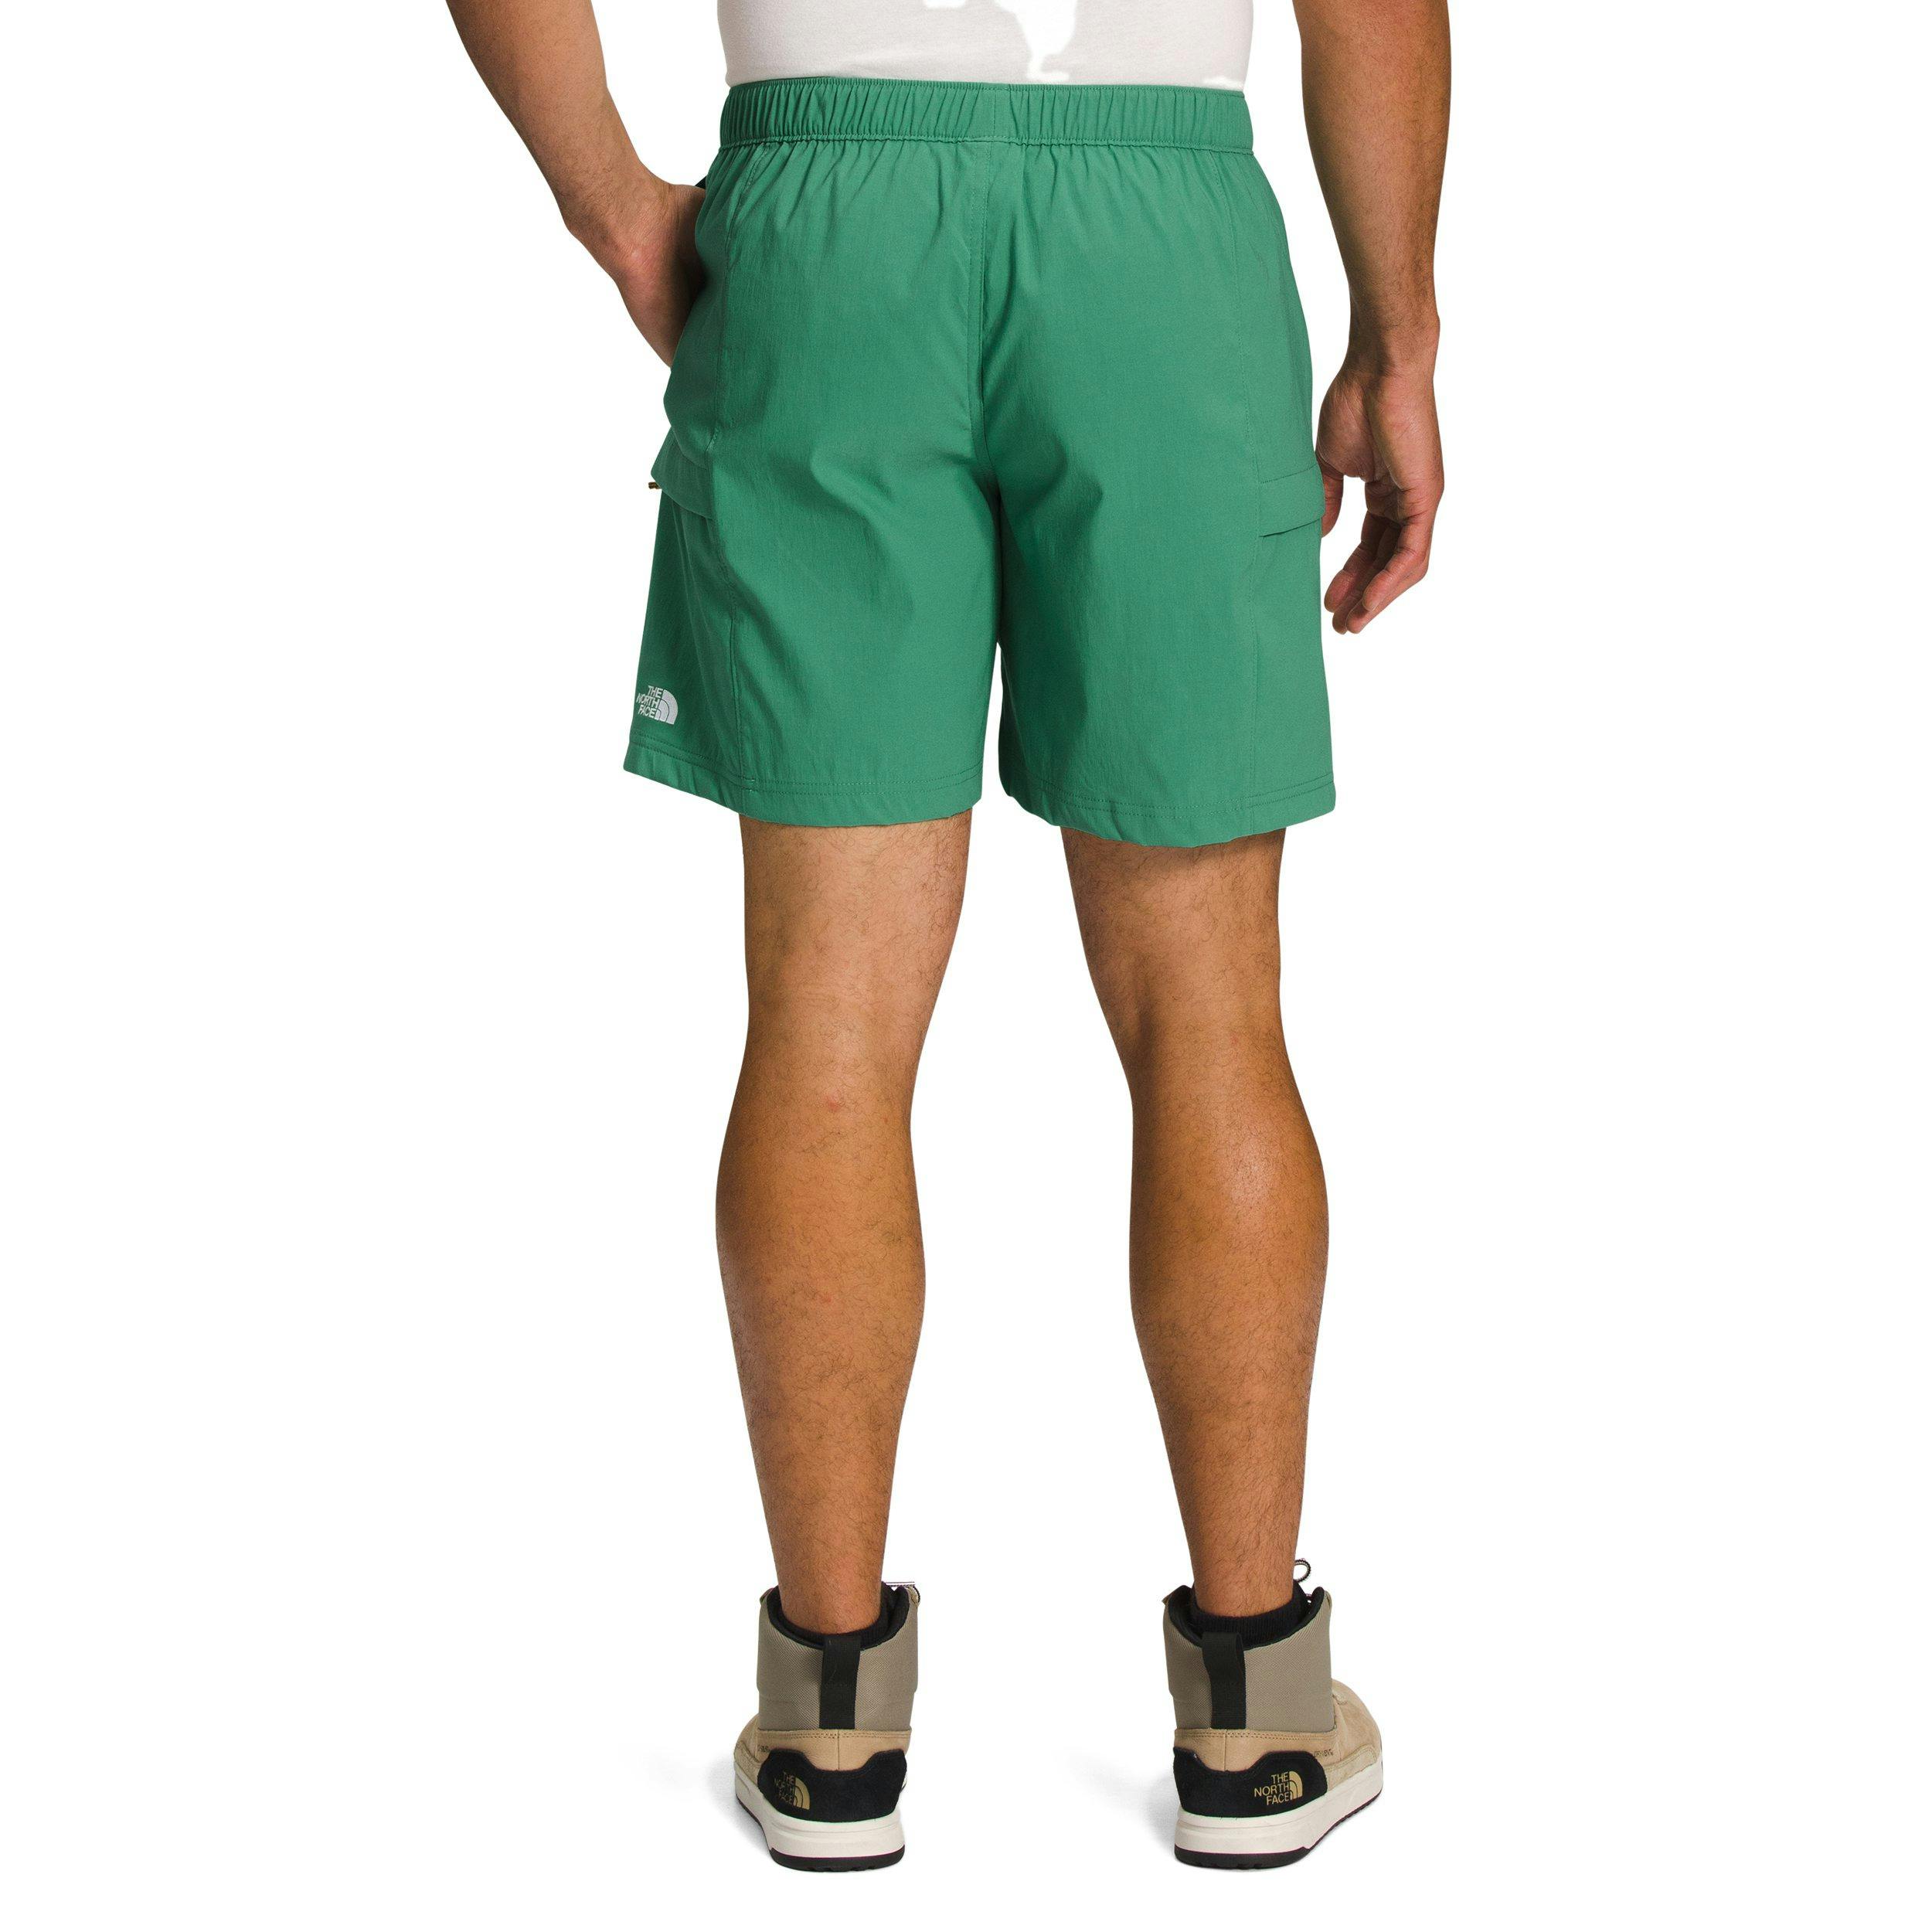 The 9 Best Men's Hiking Shorts of 2023